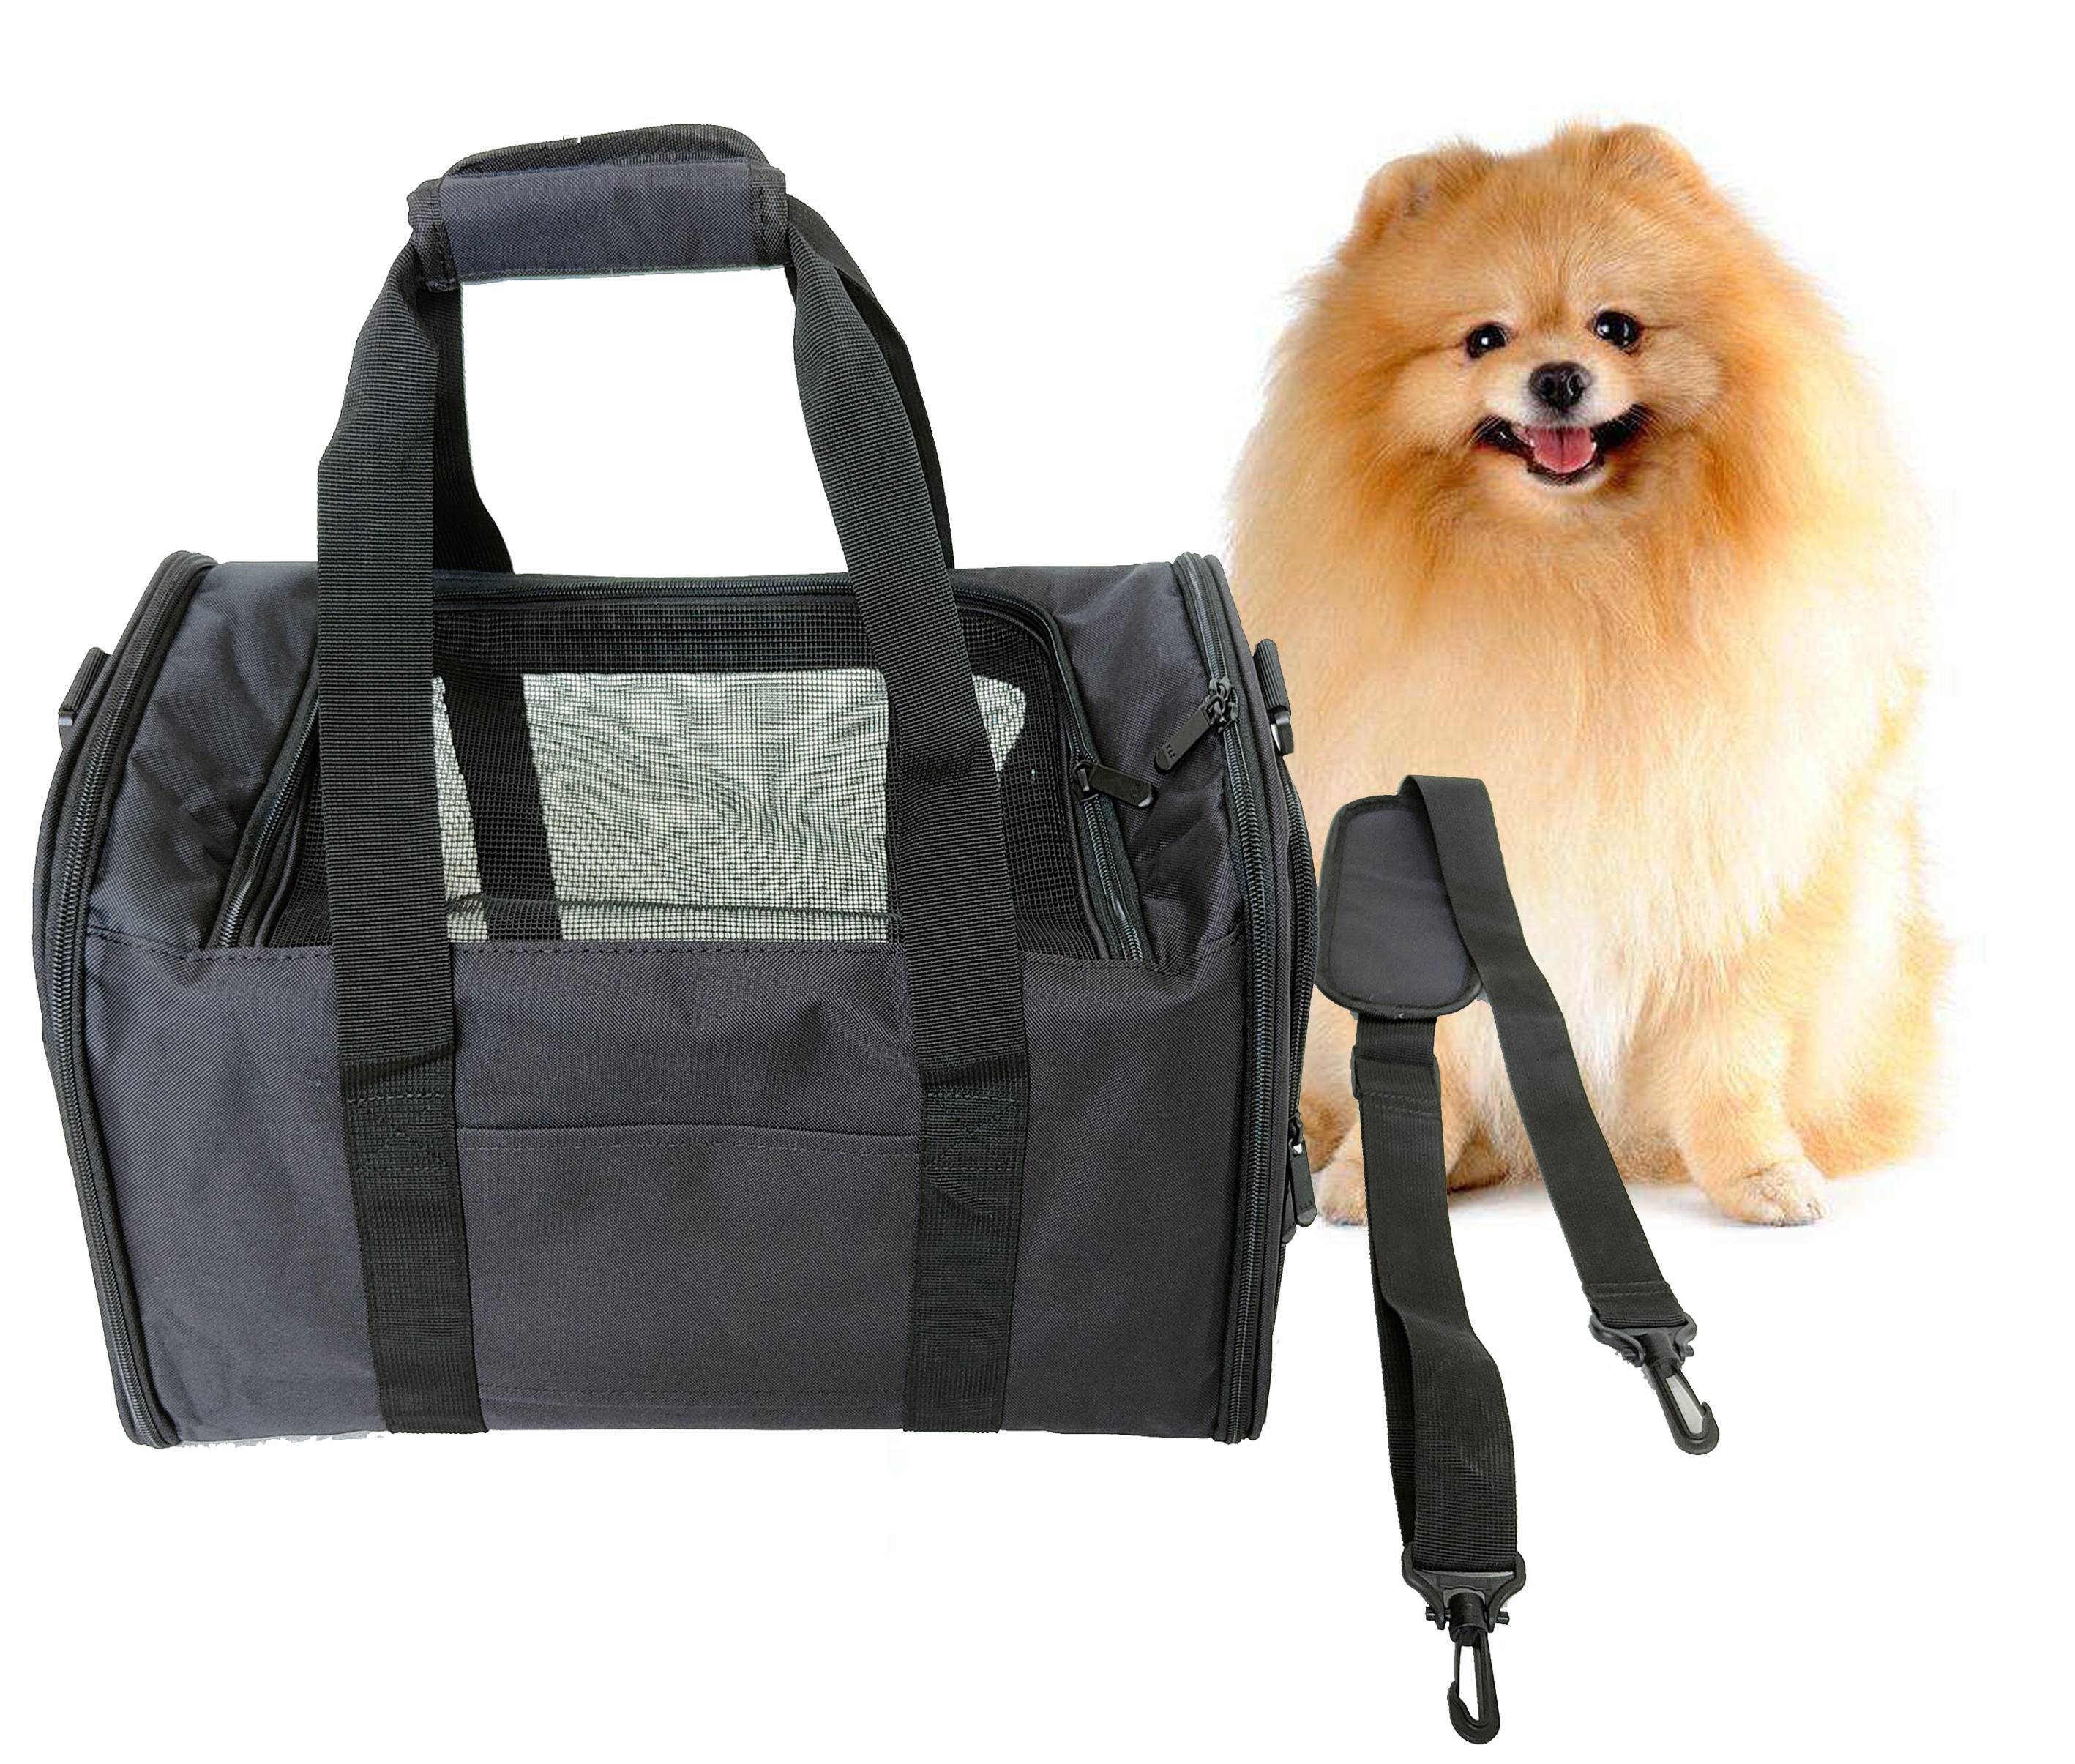 Pets Small Pet Carrier For Small Dogs And Cats - Waterproof Soft Pet Travel  Bag With Clear Window - TSA Approved Pet Carrier For Cat Travel Bag - 9.8